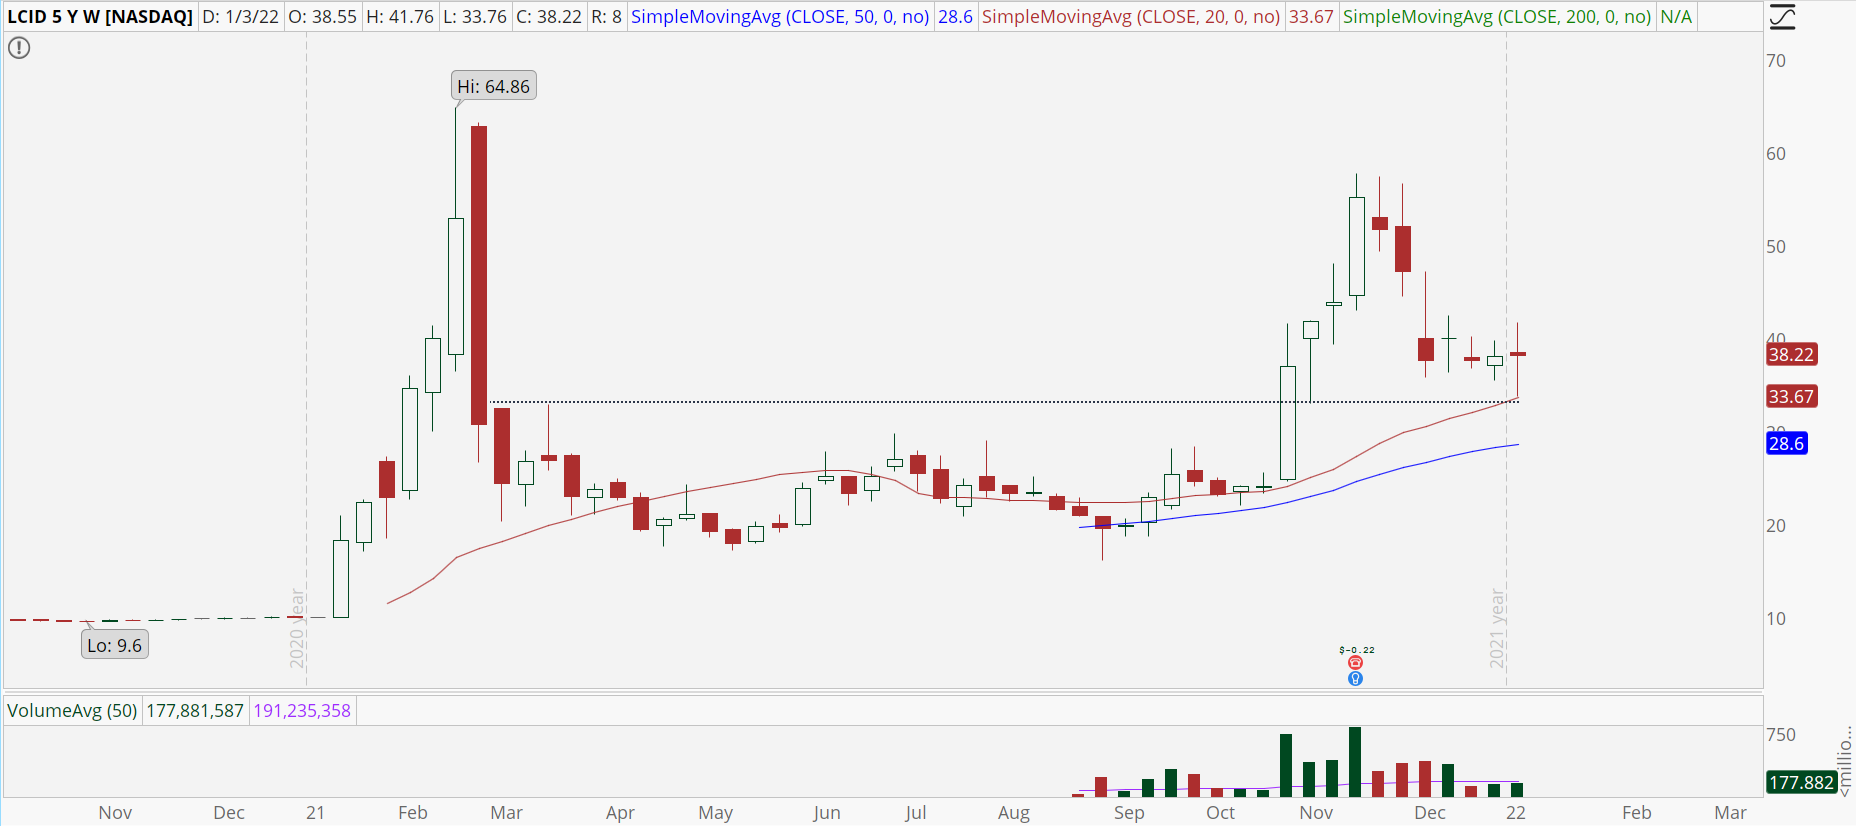 Lucid (LCID) stock weekly chart with bullish retracement.